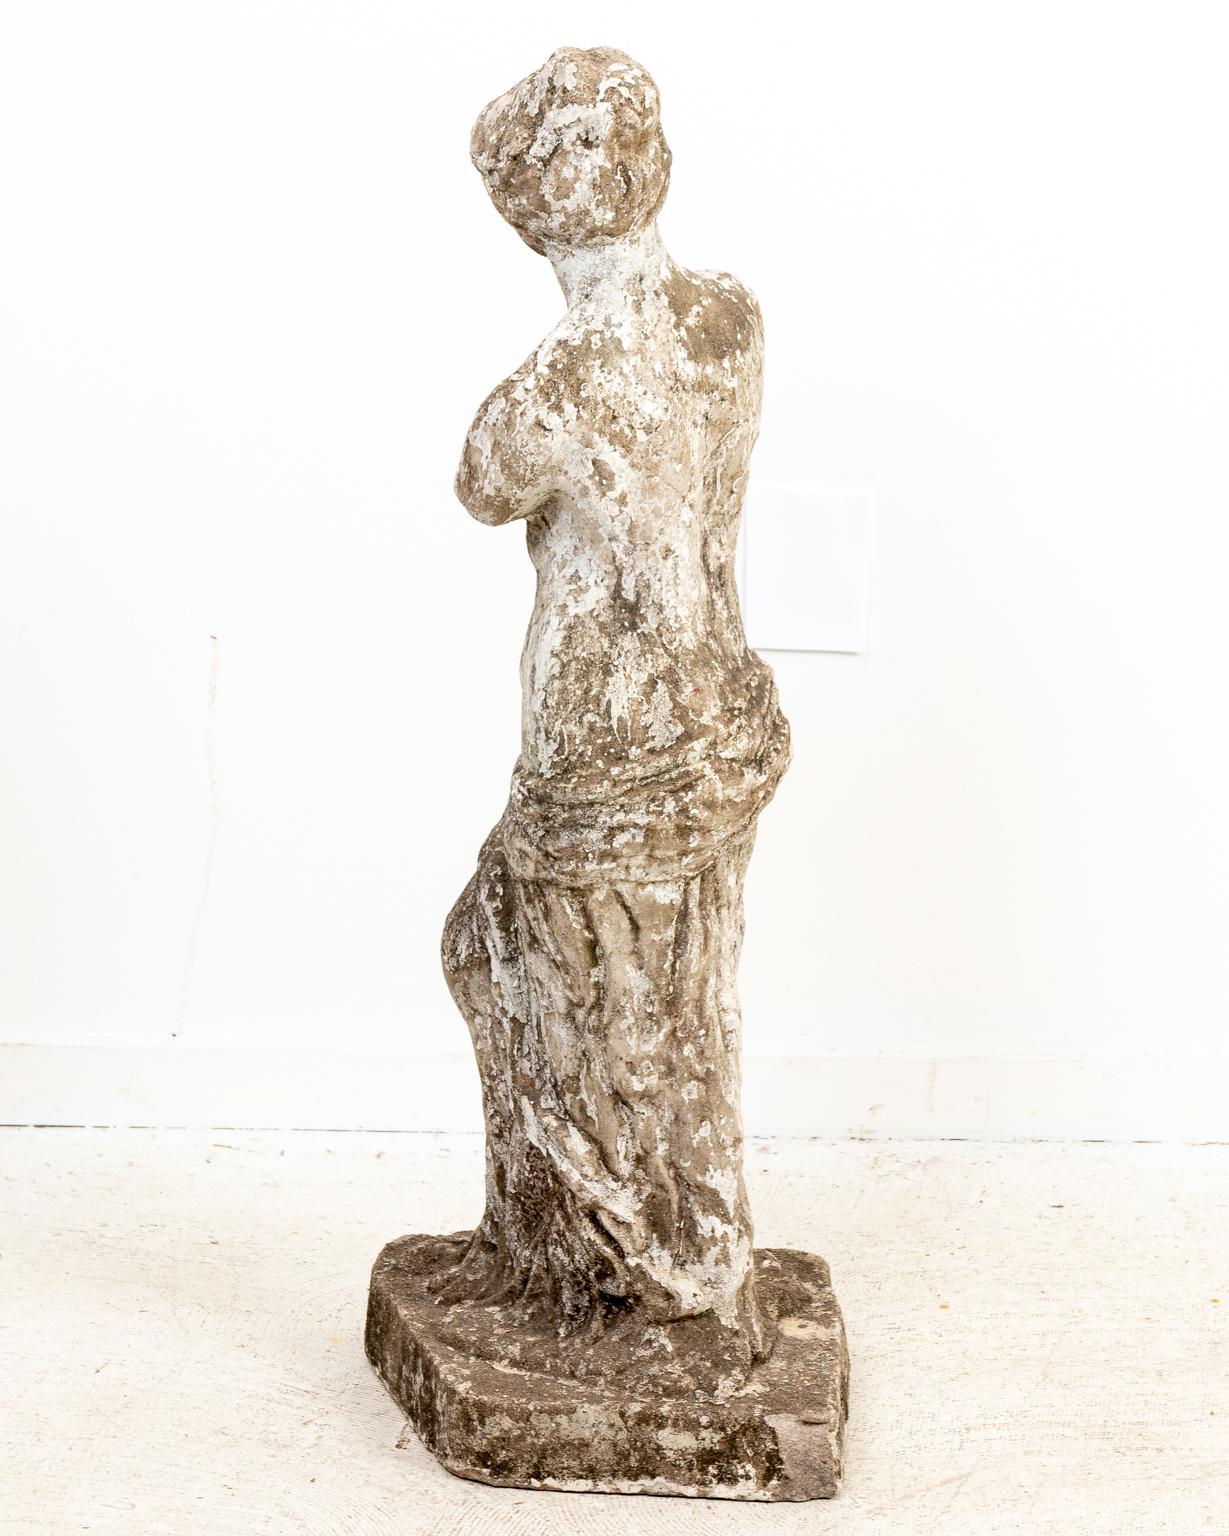 Classical style cast stone garden statue in a weathered finish depicting a robed, demi nude female figure on plinth in the manner of the Venus De Milo statue. Please note of wear consistent with age and exposure to the elements such as